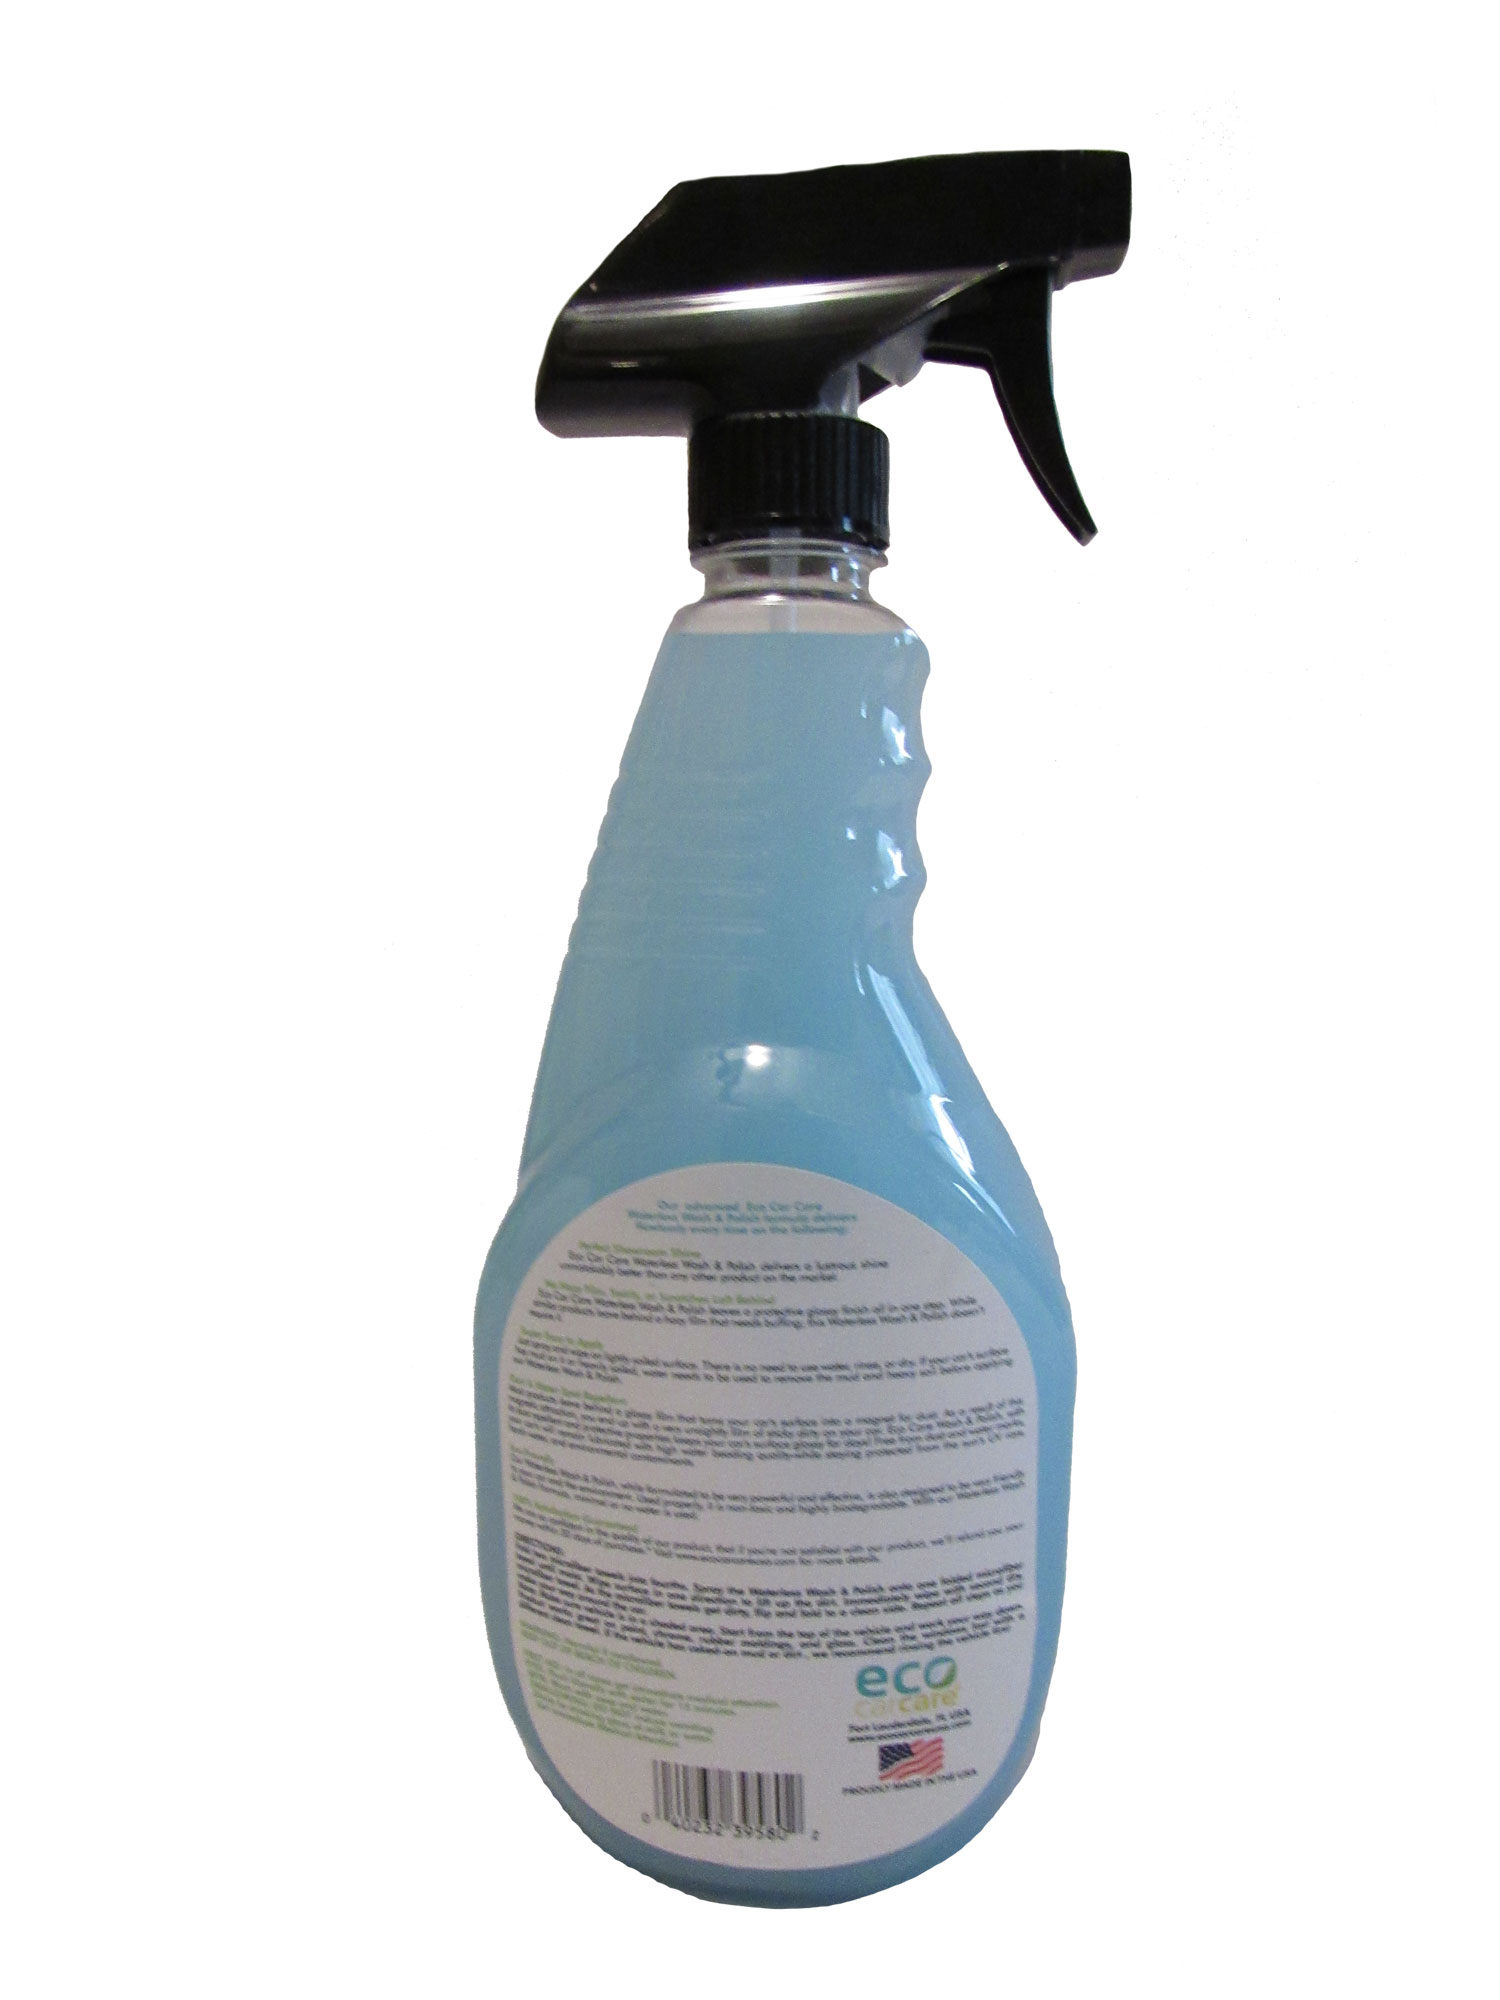 SoCal Wax Shop Waterless Car Wash - Green Eco Friendly Silicone-Free  Formula No Water Spot-Free No Rinse Car Wash Spray - Car Detailing  Products, Cleaning Supplies and Auto Care Accessories